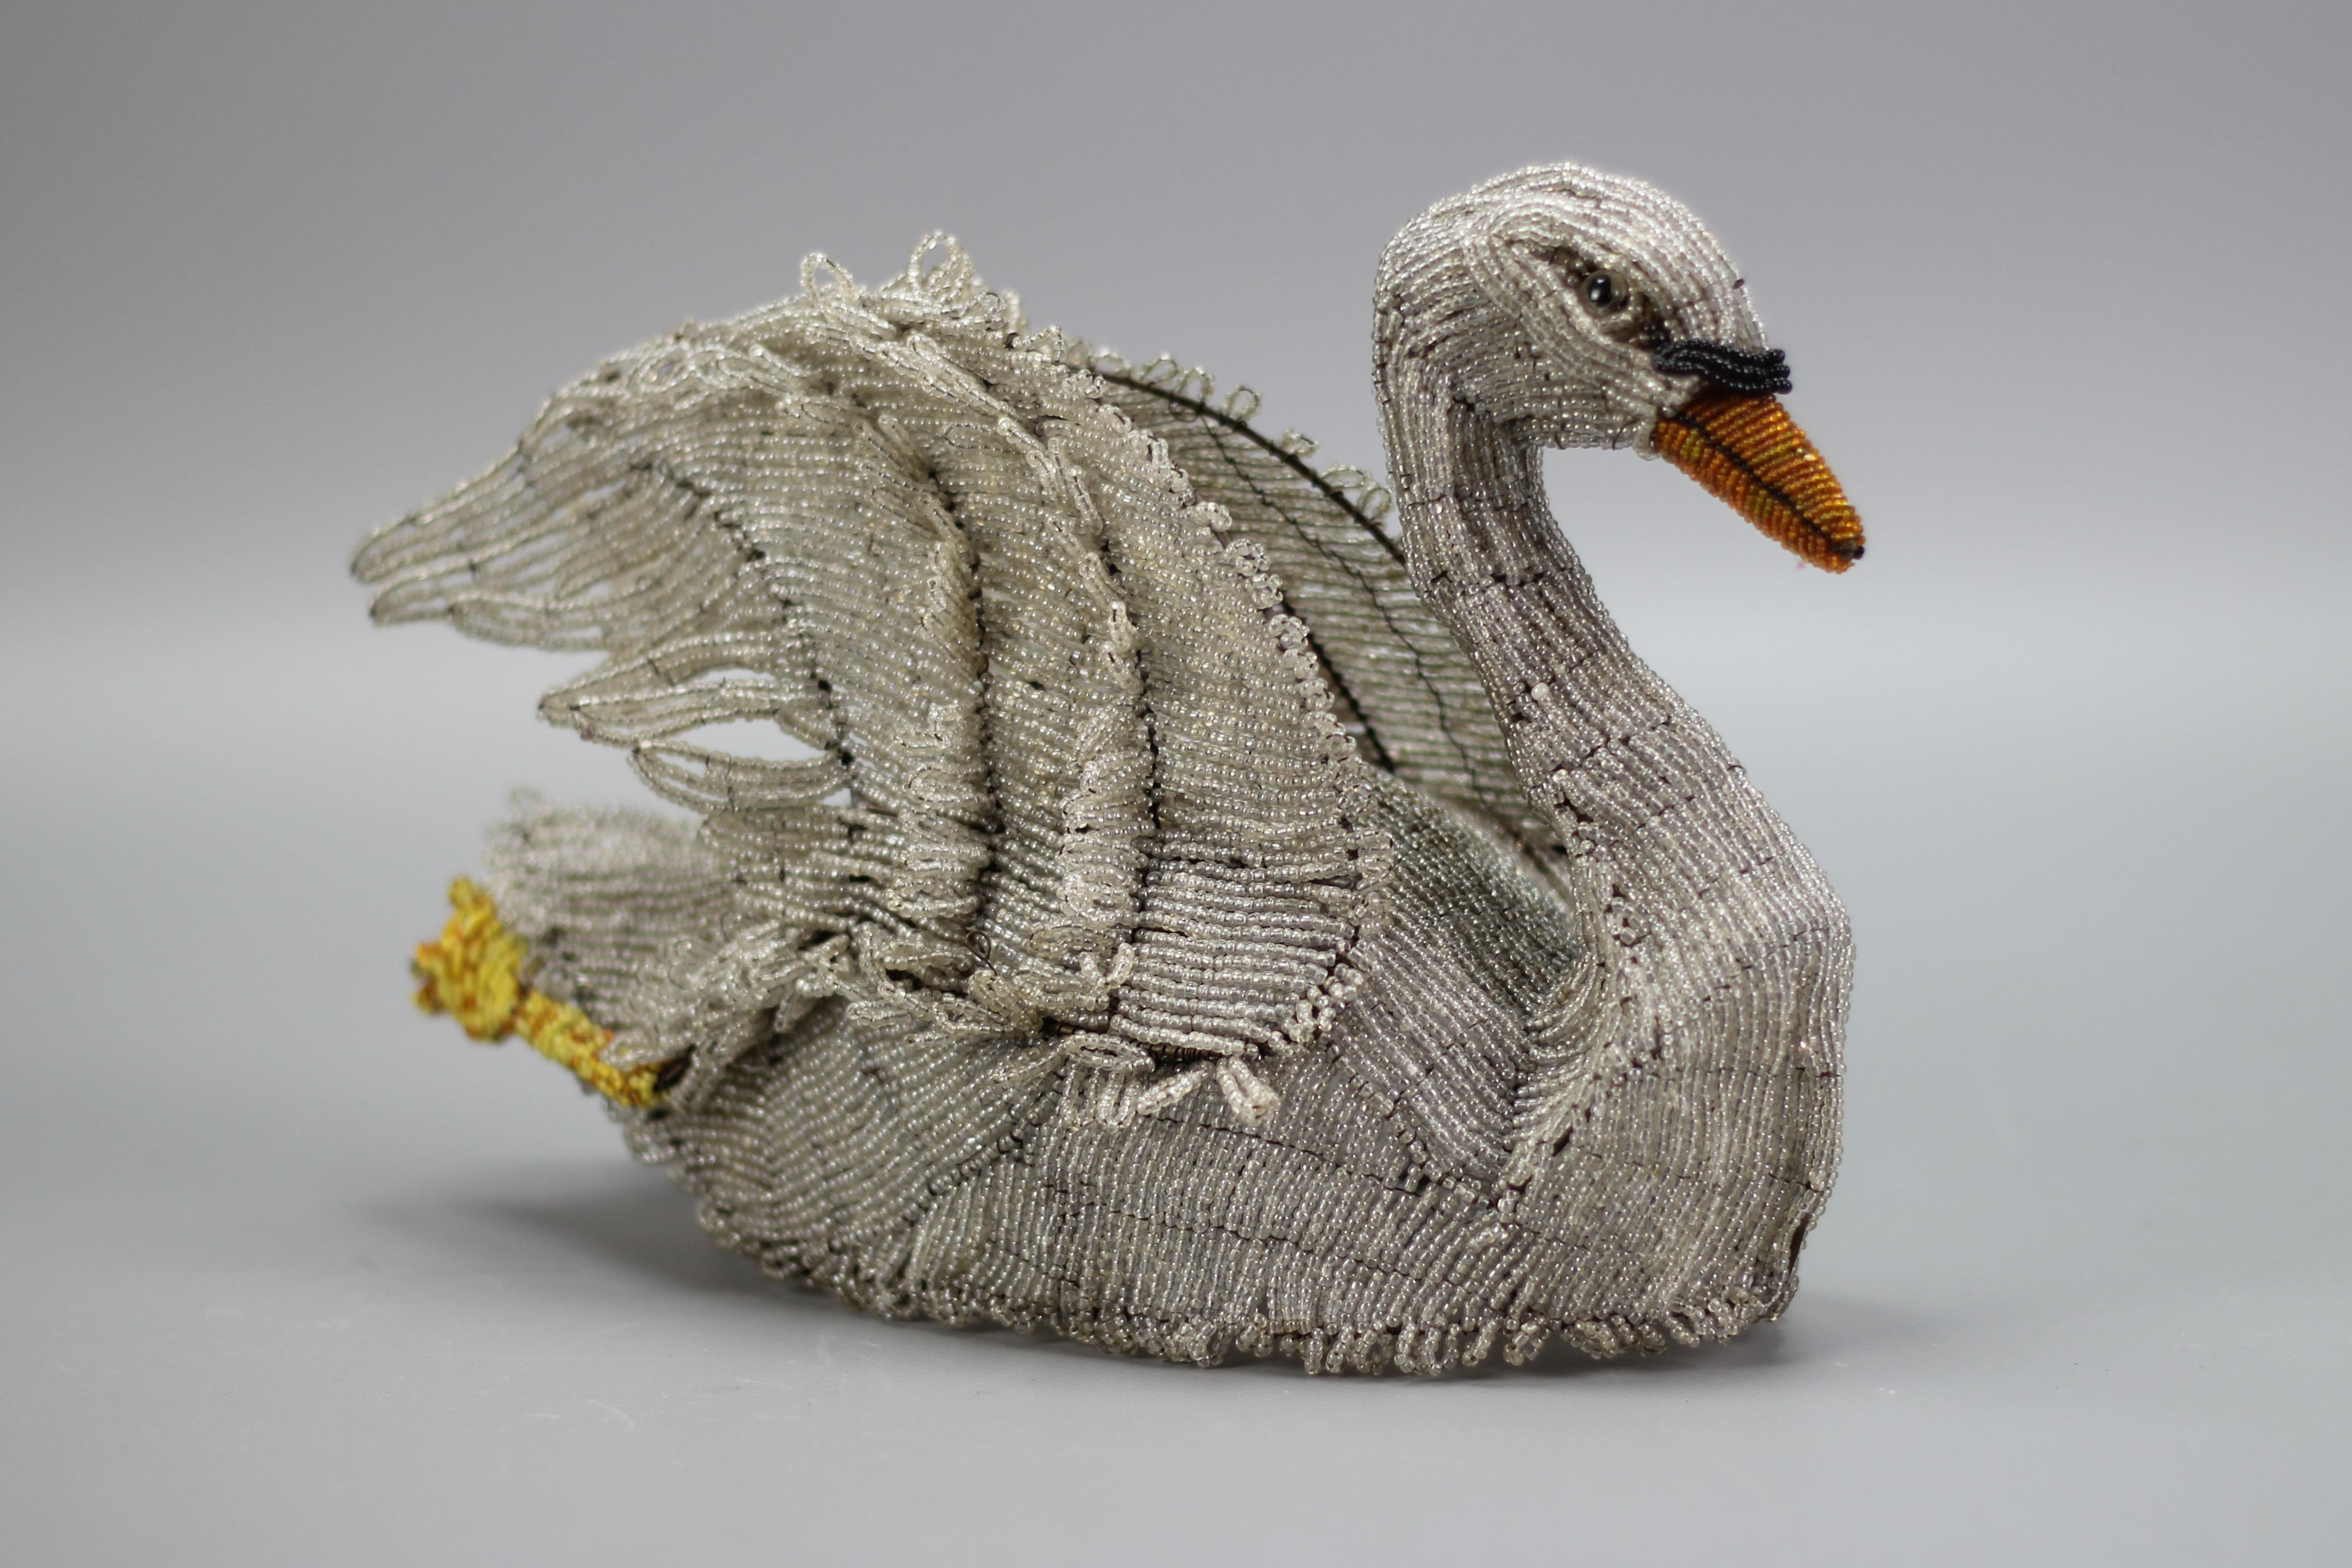 An antique figure of a swan made of glass beads, Germany, late 19th century.
Absolutely adorable and unique handmade figure of a swan features exquisite beadwork with lifelike details in white, yellow, orange, and black.
Beautiful and very